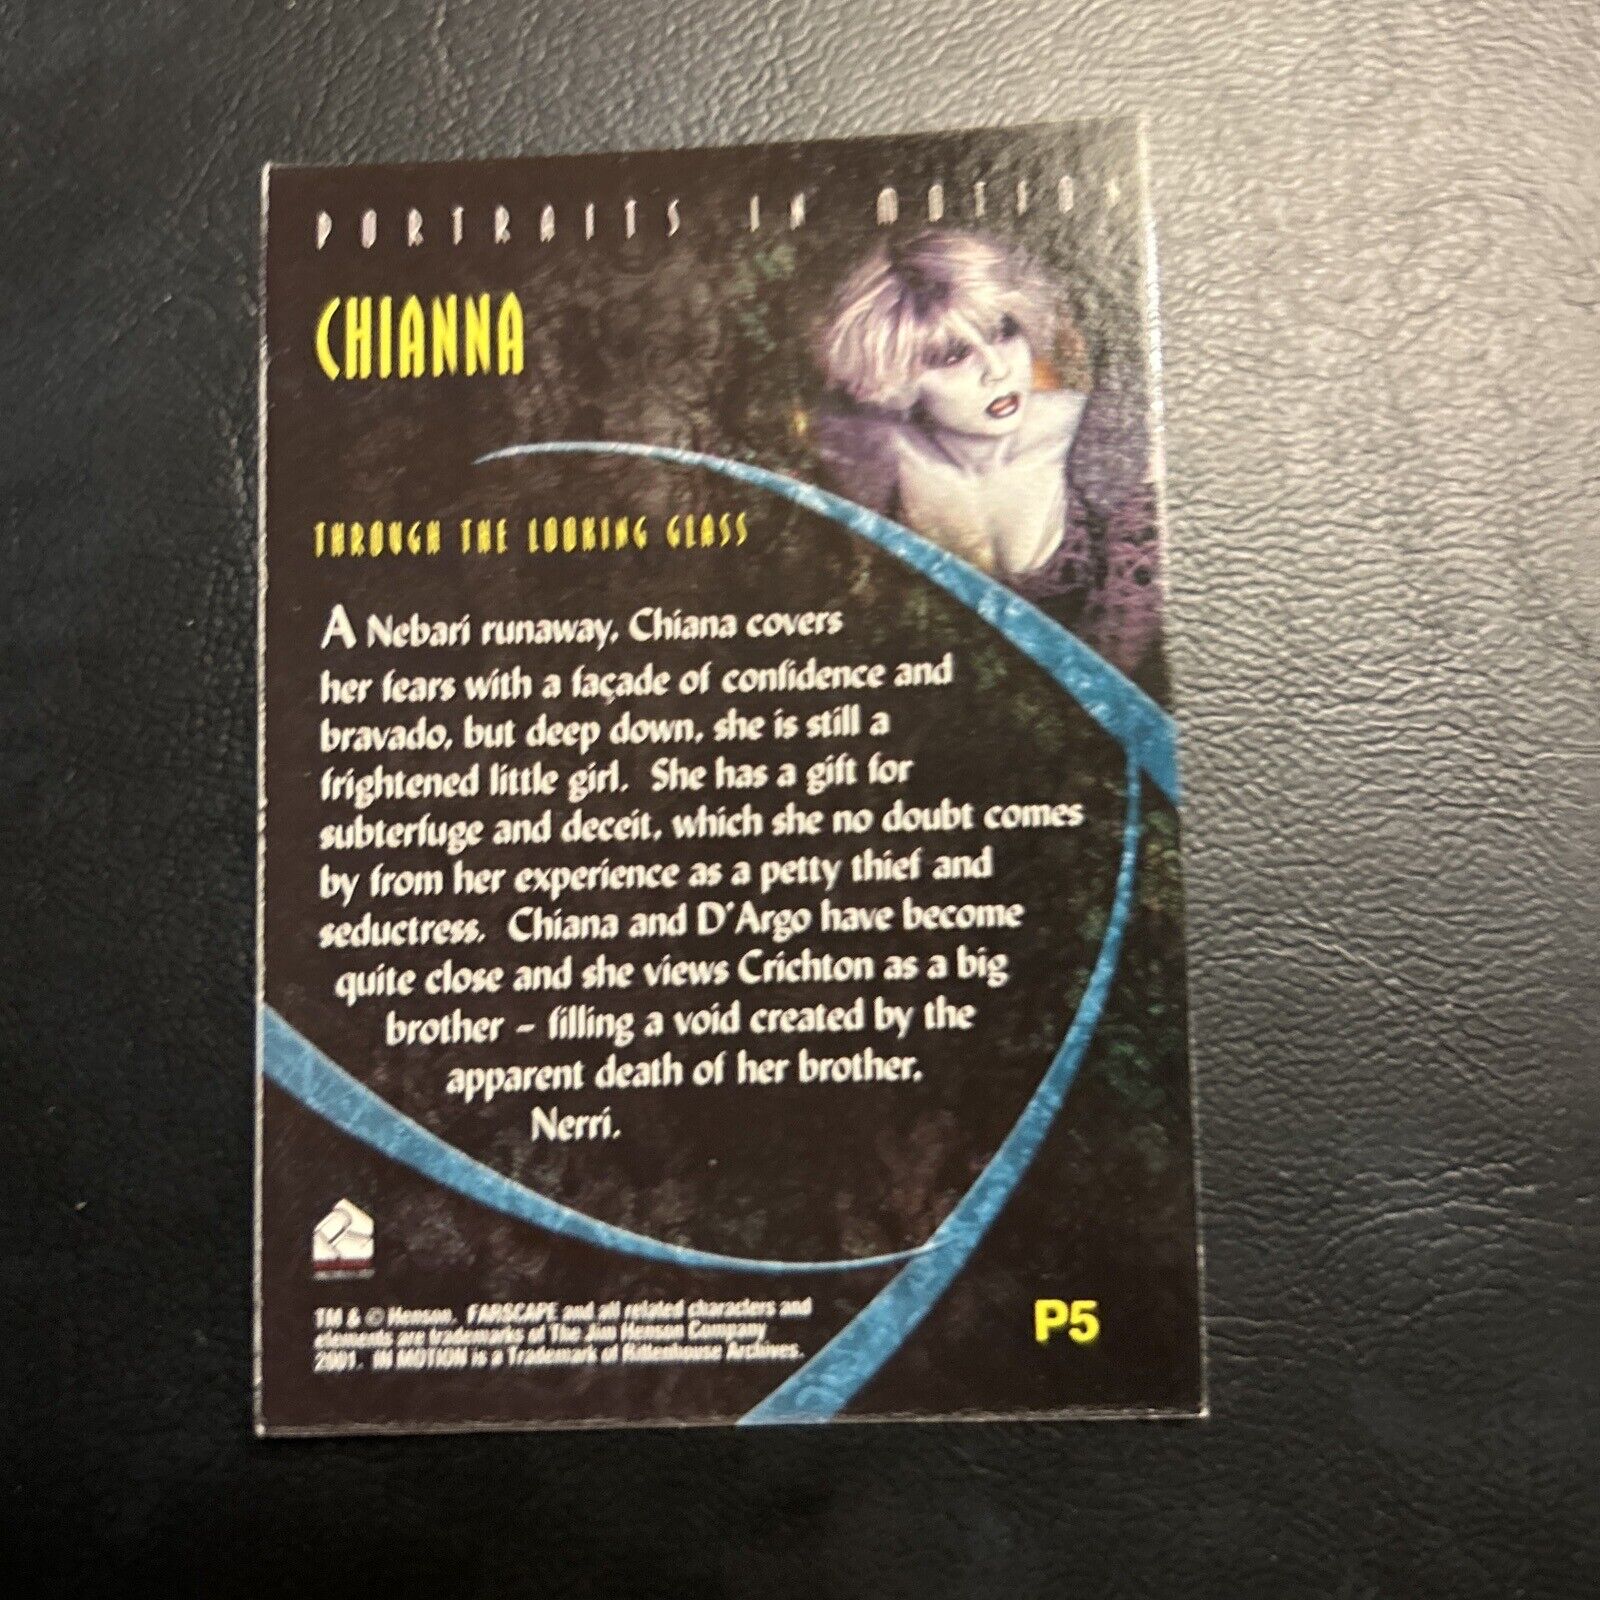 Jb5b Farscape 2001 Portraits In Motion Premiere P5 Chianna Through The Looking